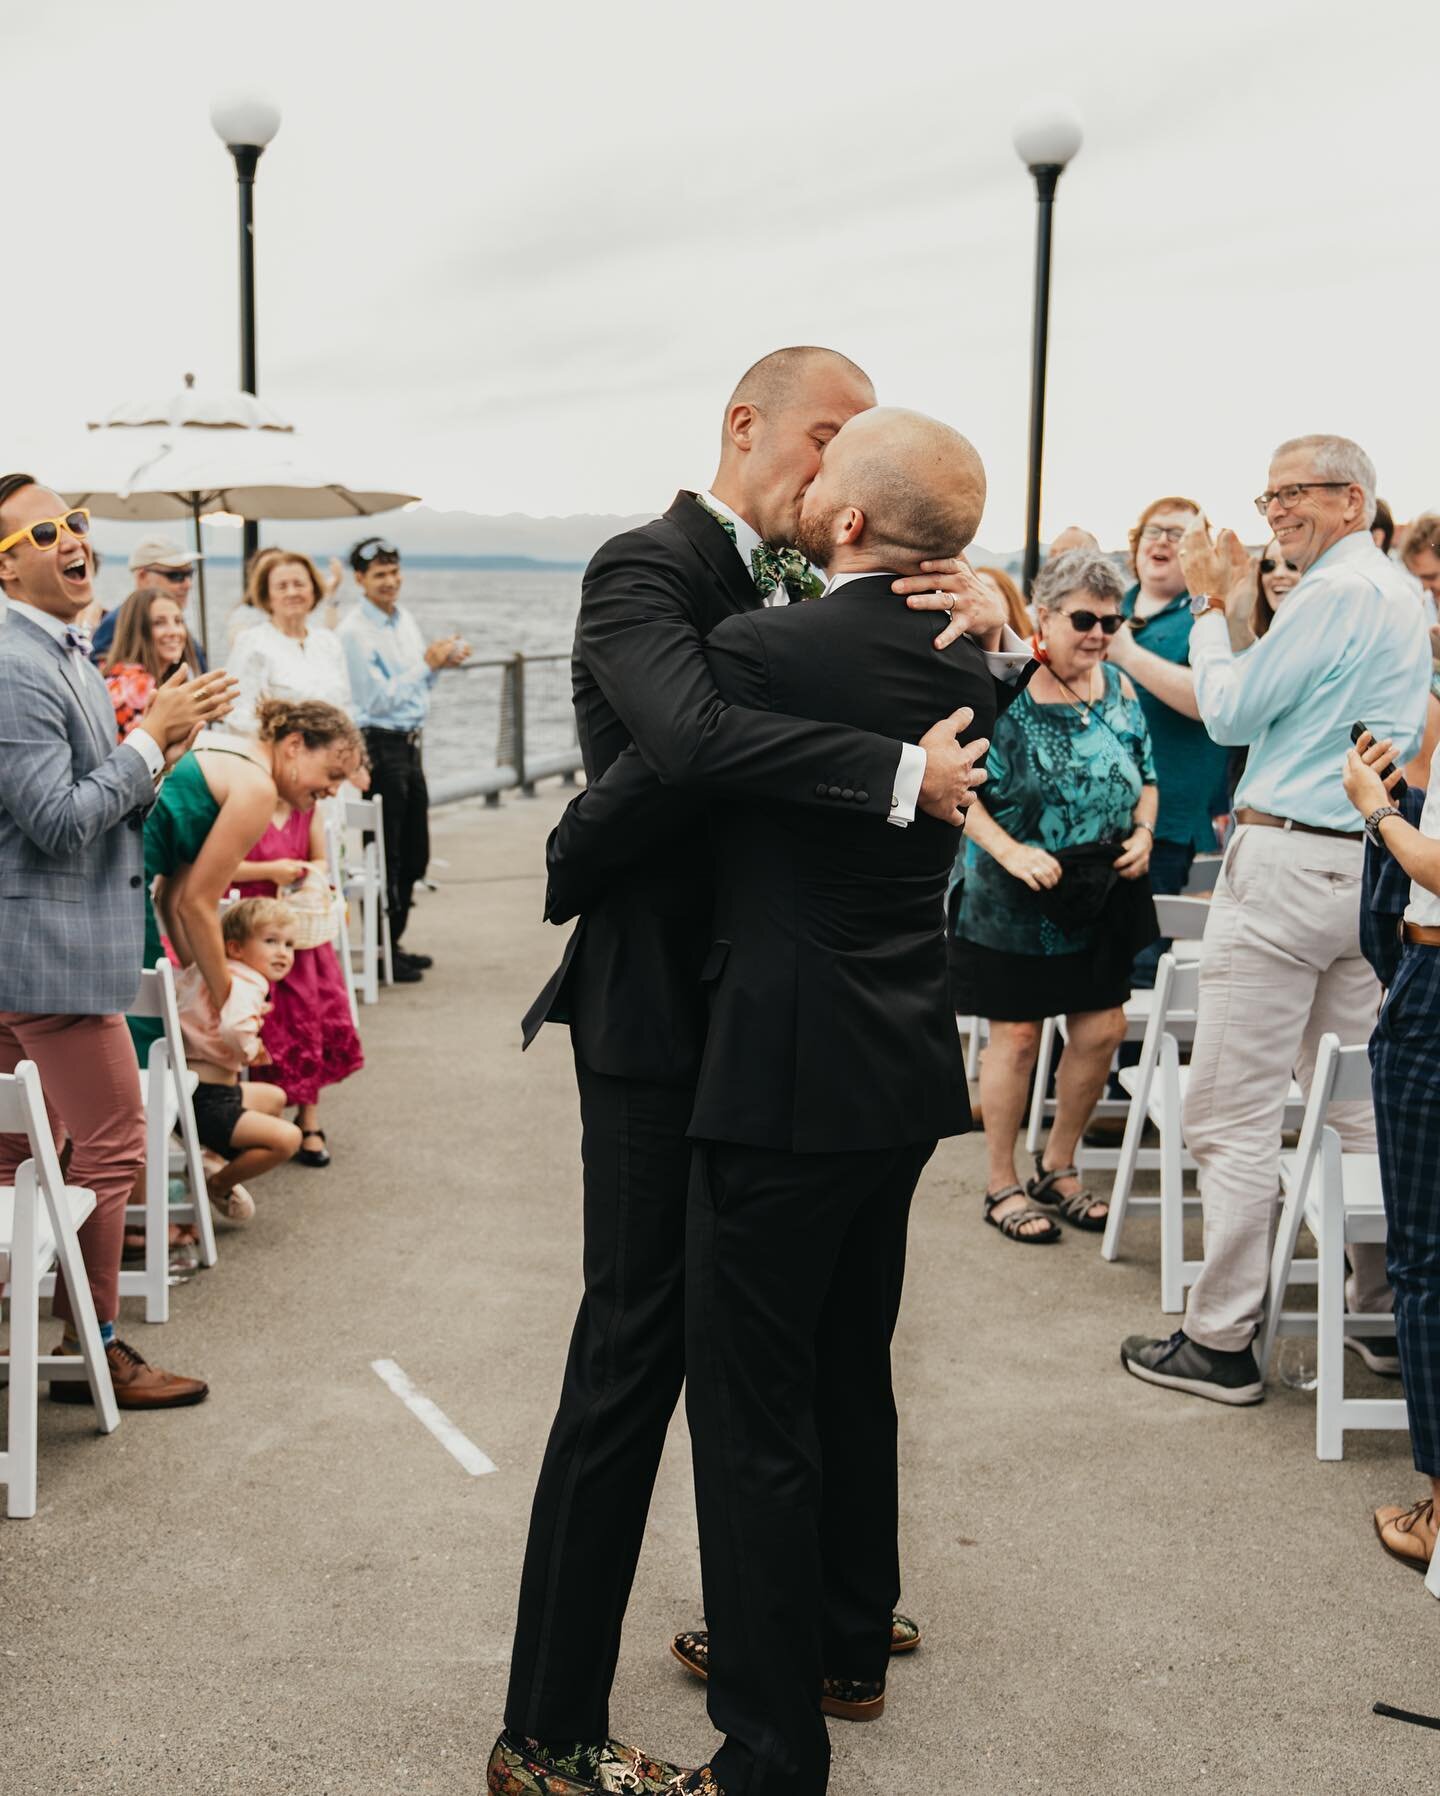 I don&rsquo;t even know where to start with how amazing Jon &amp; Chris&rsquo; wedding was. From their outfits to all the things they made for it, from the homemade dunk tank to the sheer intentionality of everything they did. It was truly an honor t